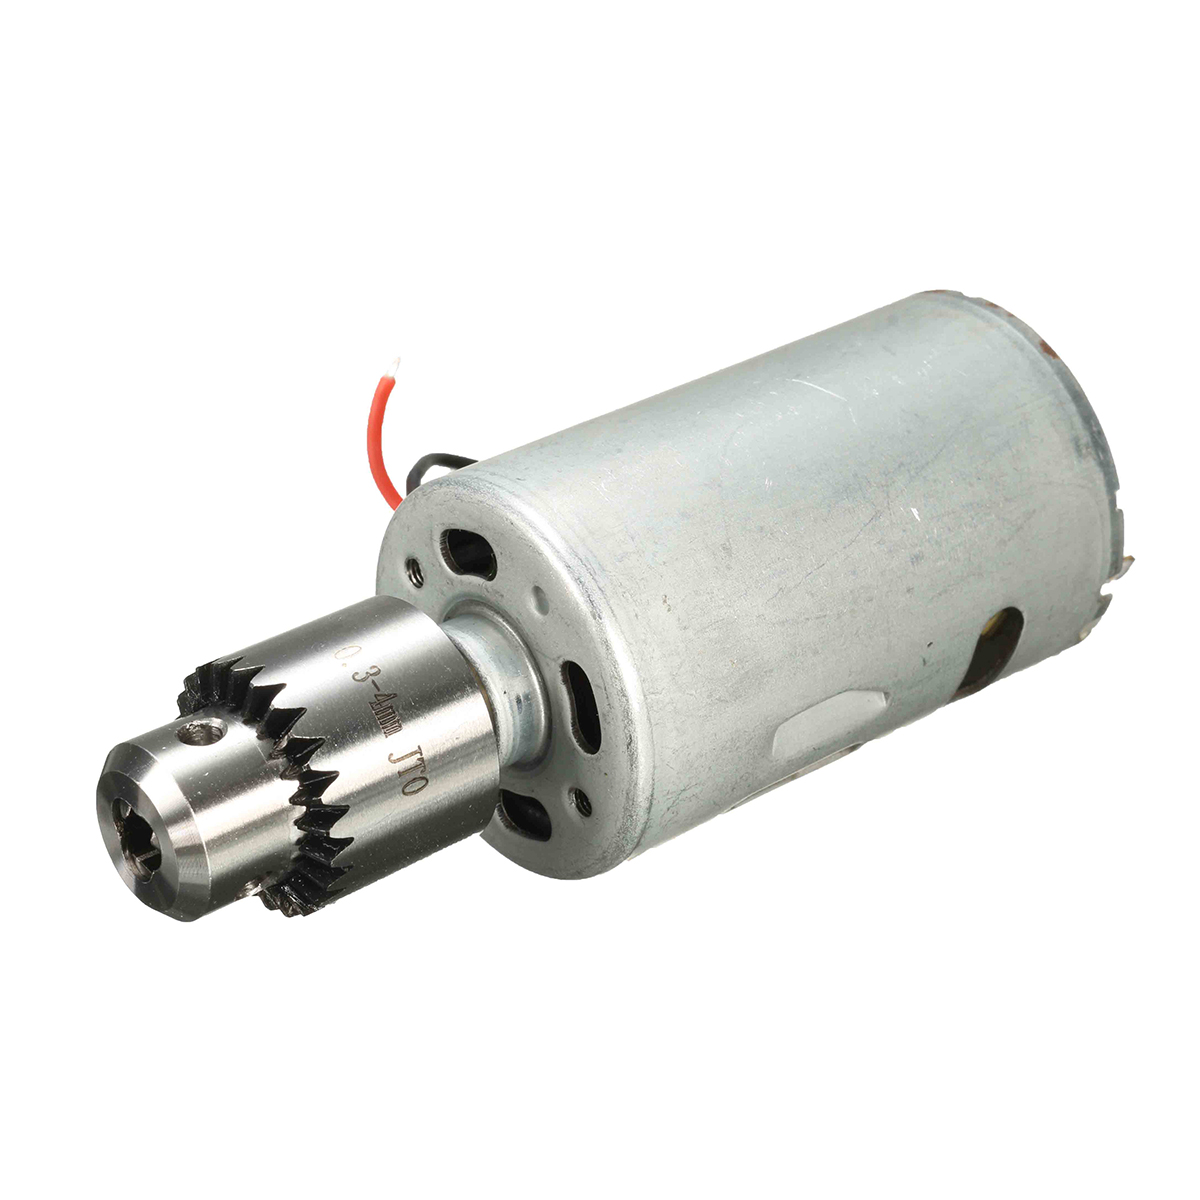 DC-12V-24V-555-Motor-For-DIY-Electric-Hand-Drill-With-JT0-Chuck-1117553-4